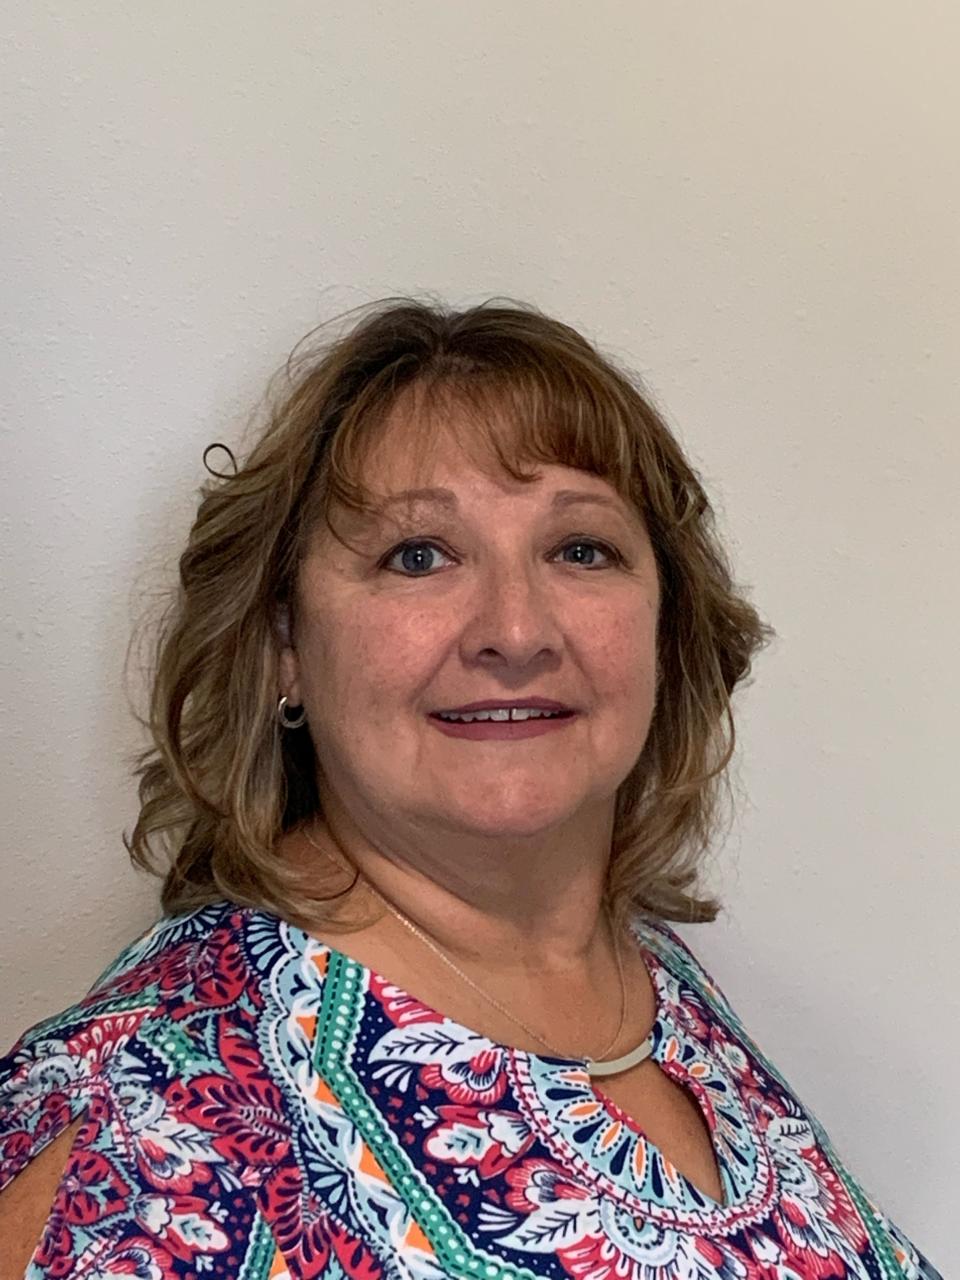 Dunn has called Marion home for many years. Her passion for this community is clear in the way she pours herself into her work, both in her position with the Marion Area Chamber of Commerce and volunteer positions.